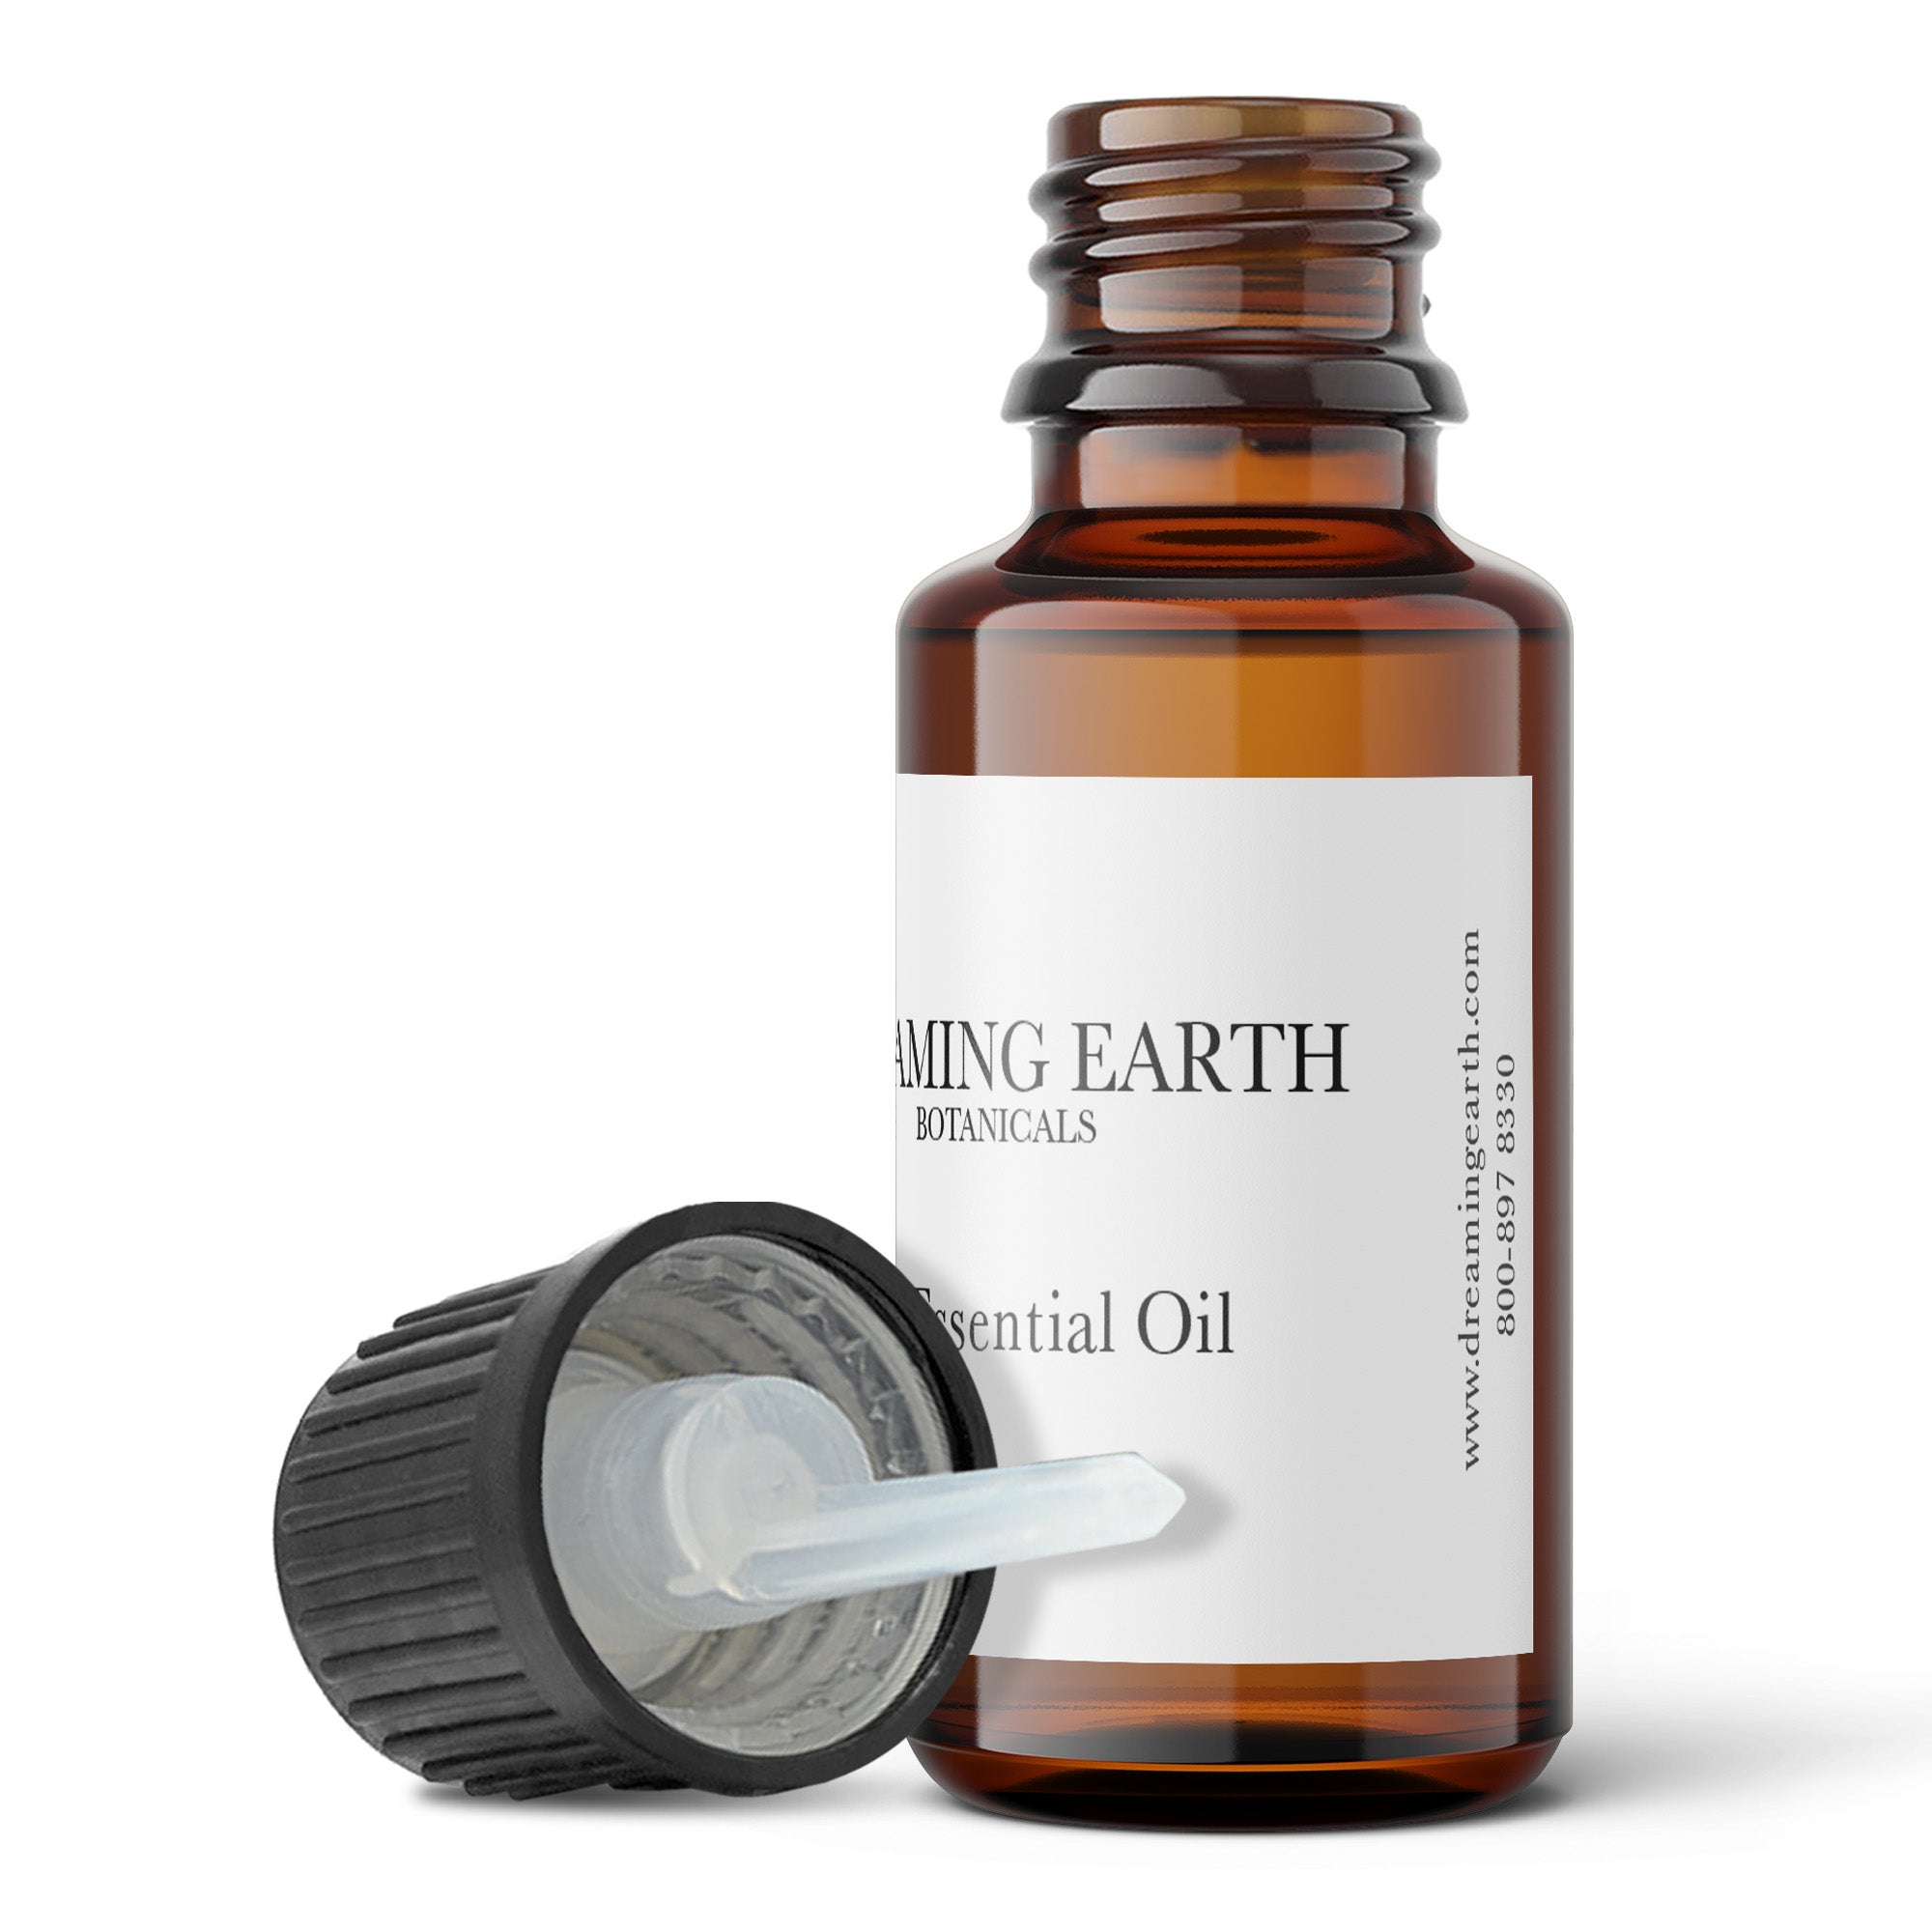 Load image into Gallery viewer, Tangerine Essential Oil - Dreaming Earth Inc
